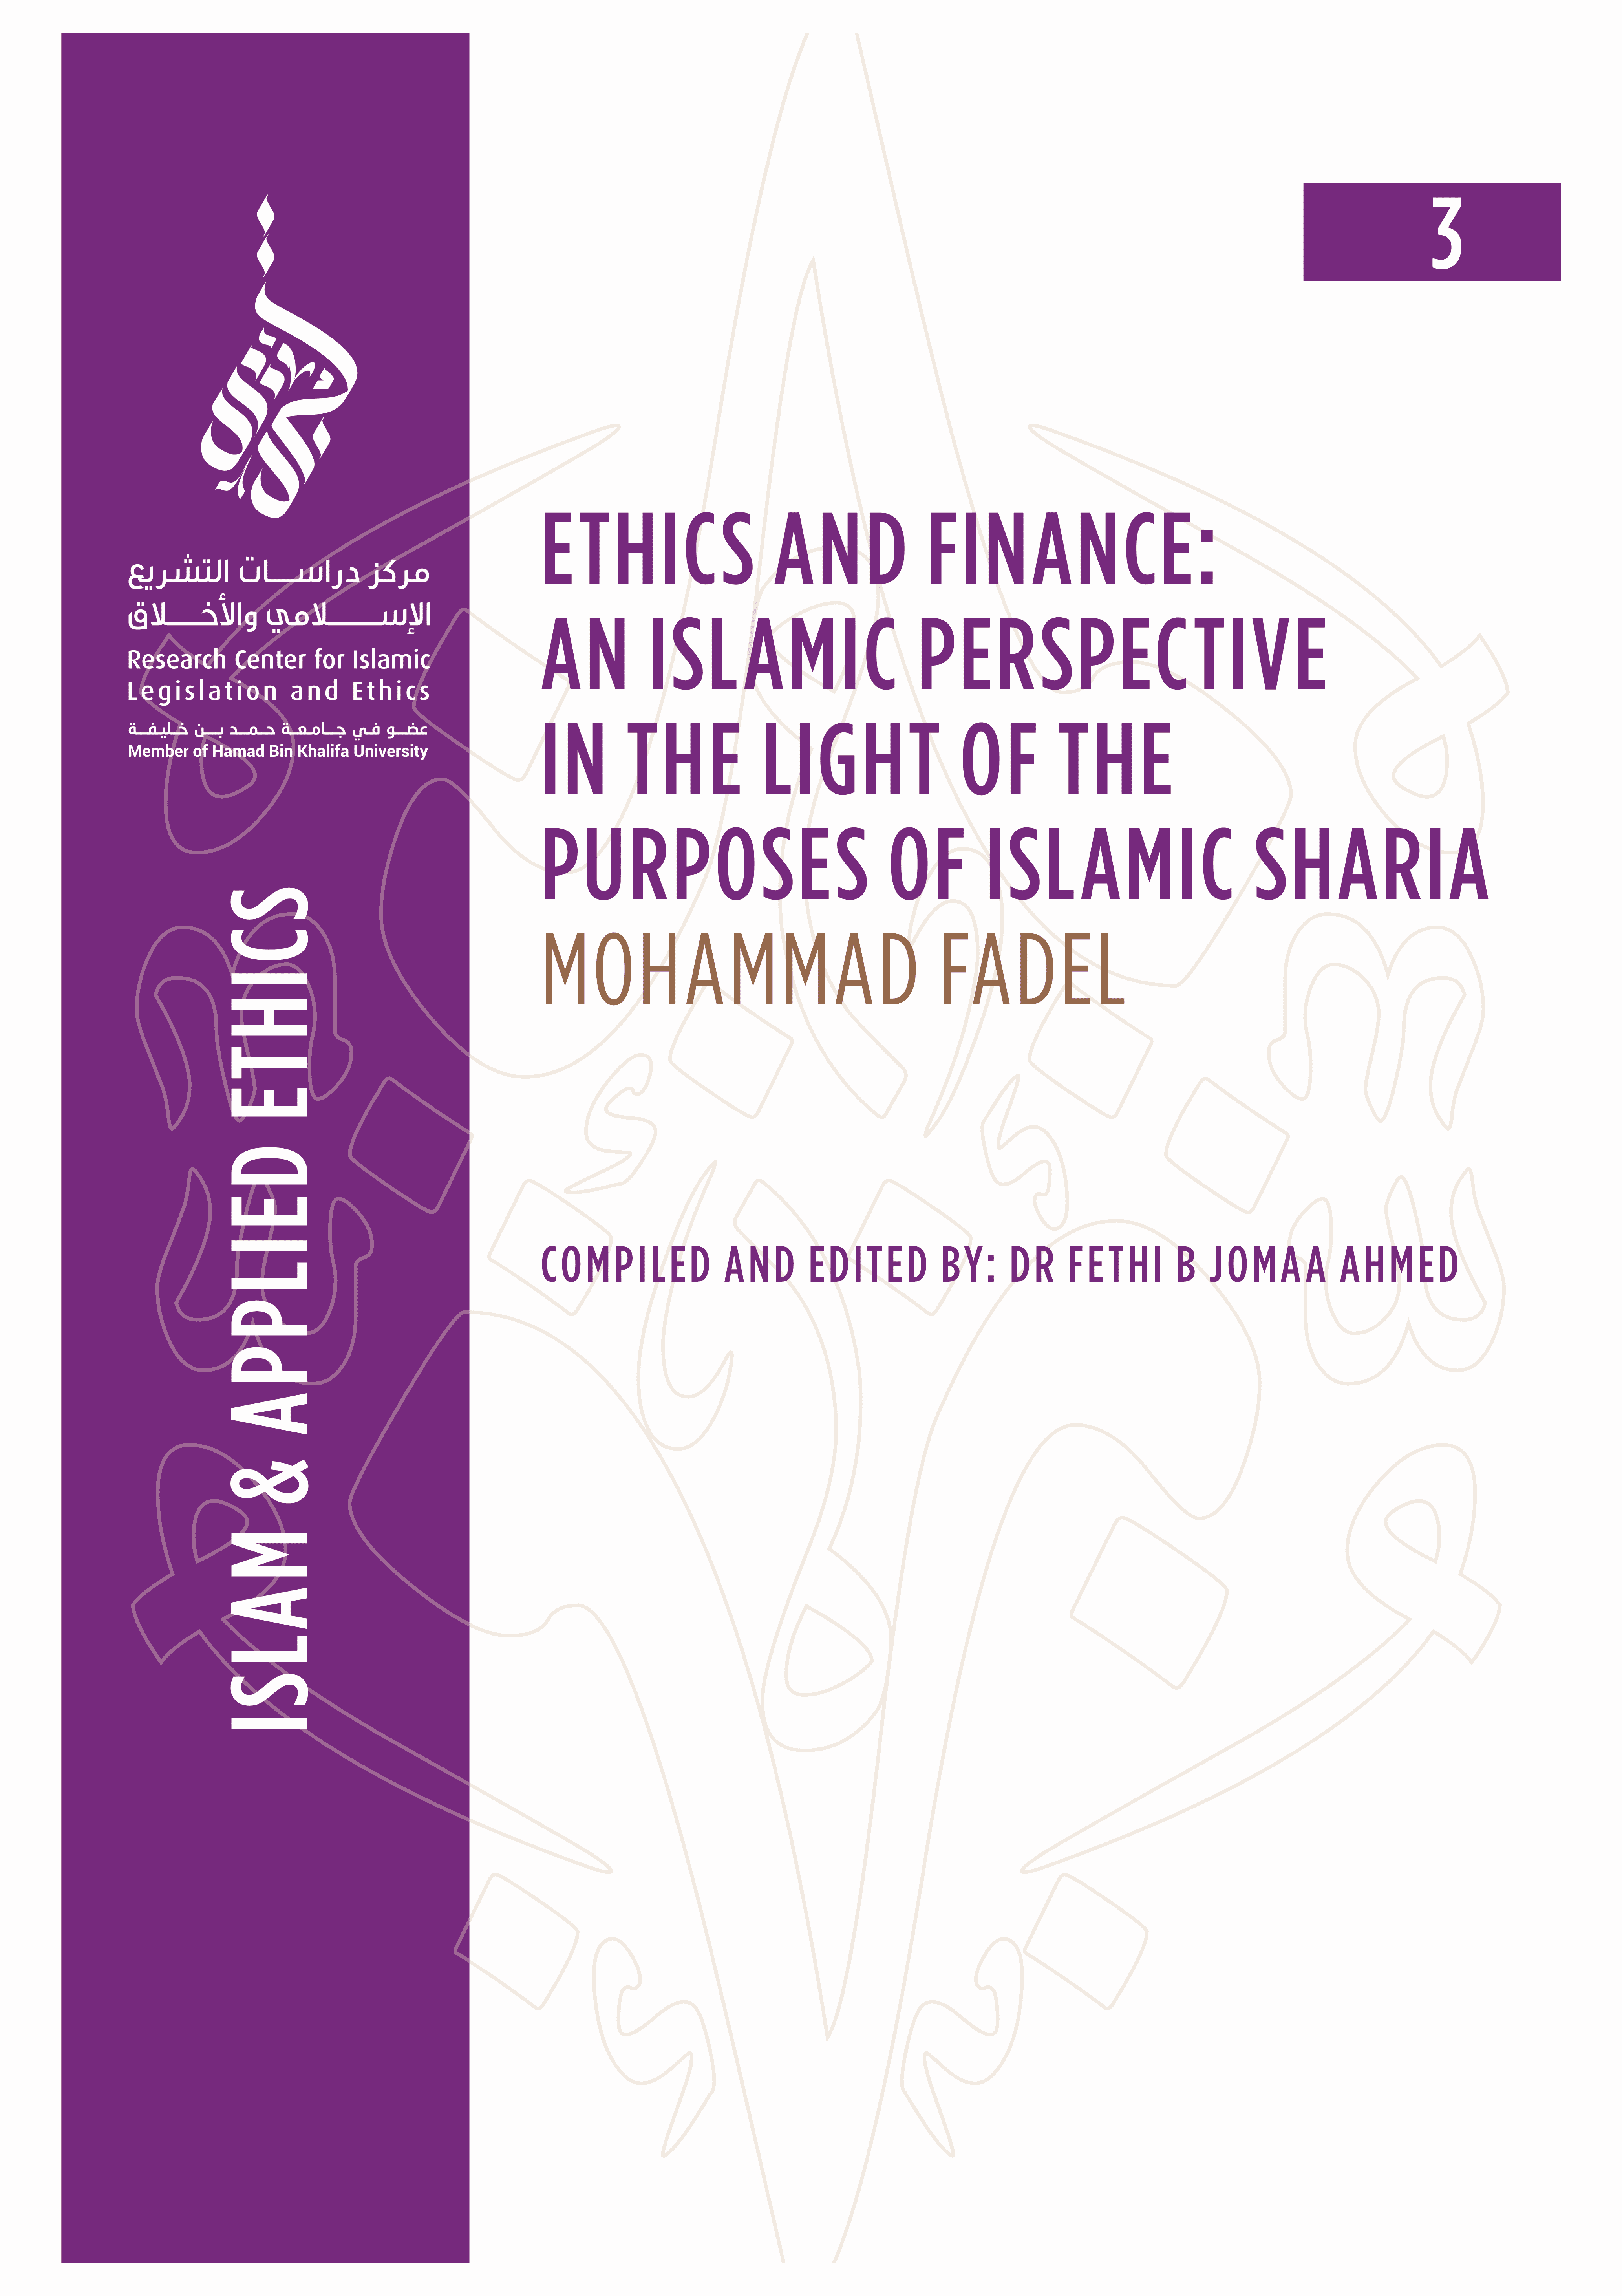 Ethics and Finance: An Islamic Perspective In The Light Of The Purposes Of Islamic Sharia